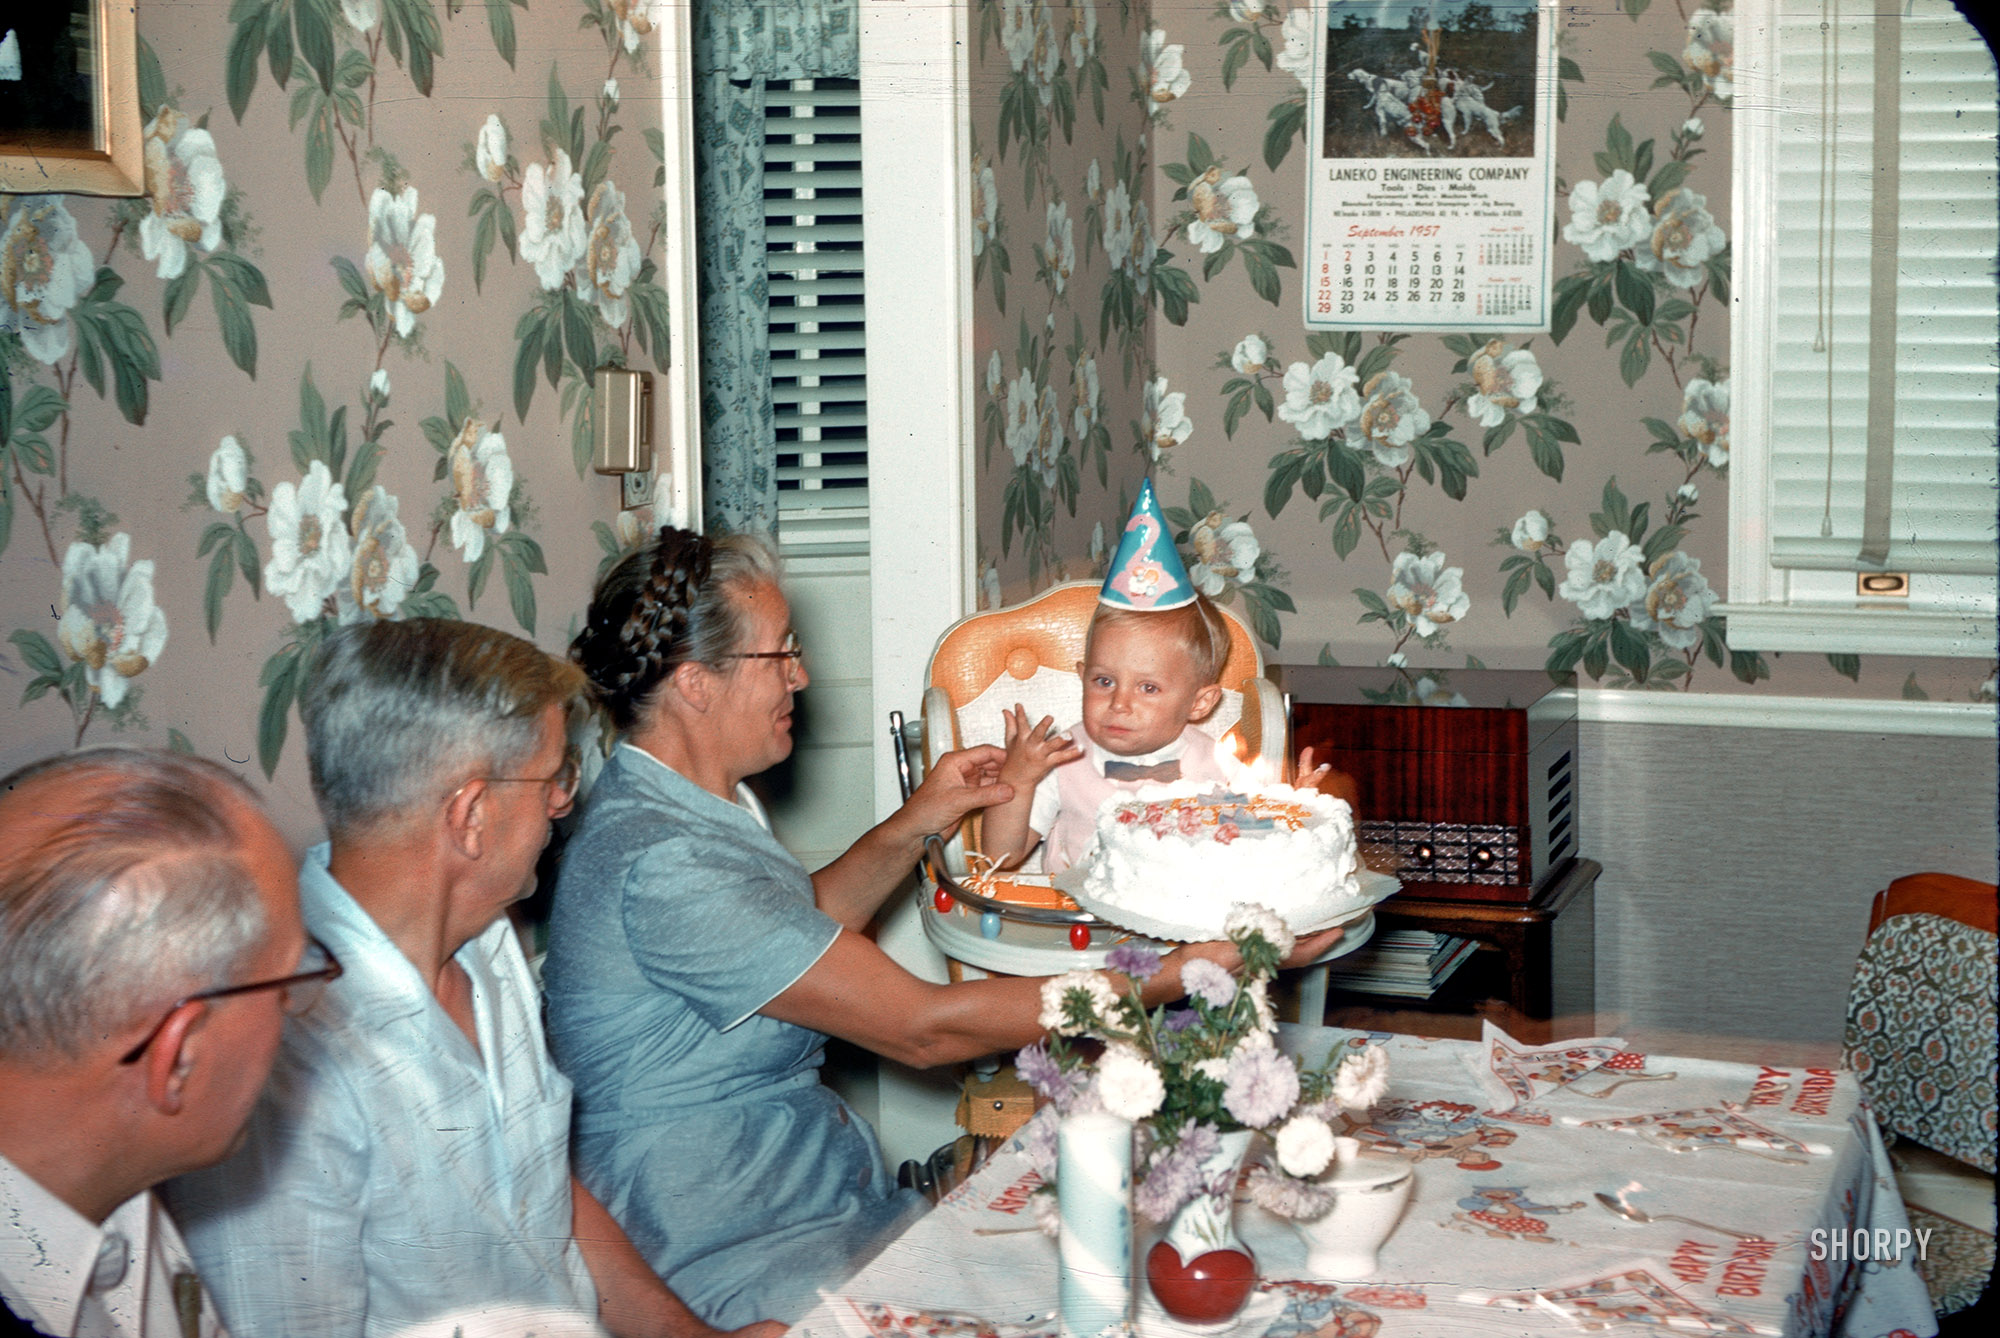 September 1957 somewhere in Pennsylvania. In the prequel to this slide, we have Big Brother's second birthday. Let the anthropological analysis and cultural deconstruction begin! 35mm Kodachrome transparency. View full size.